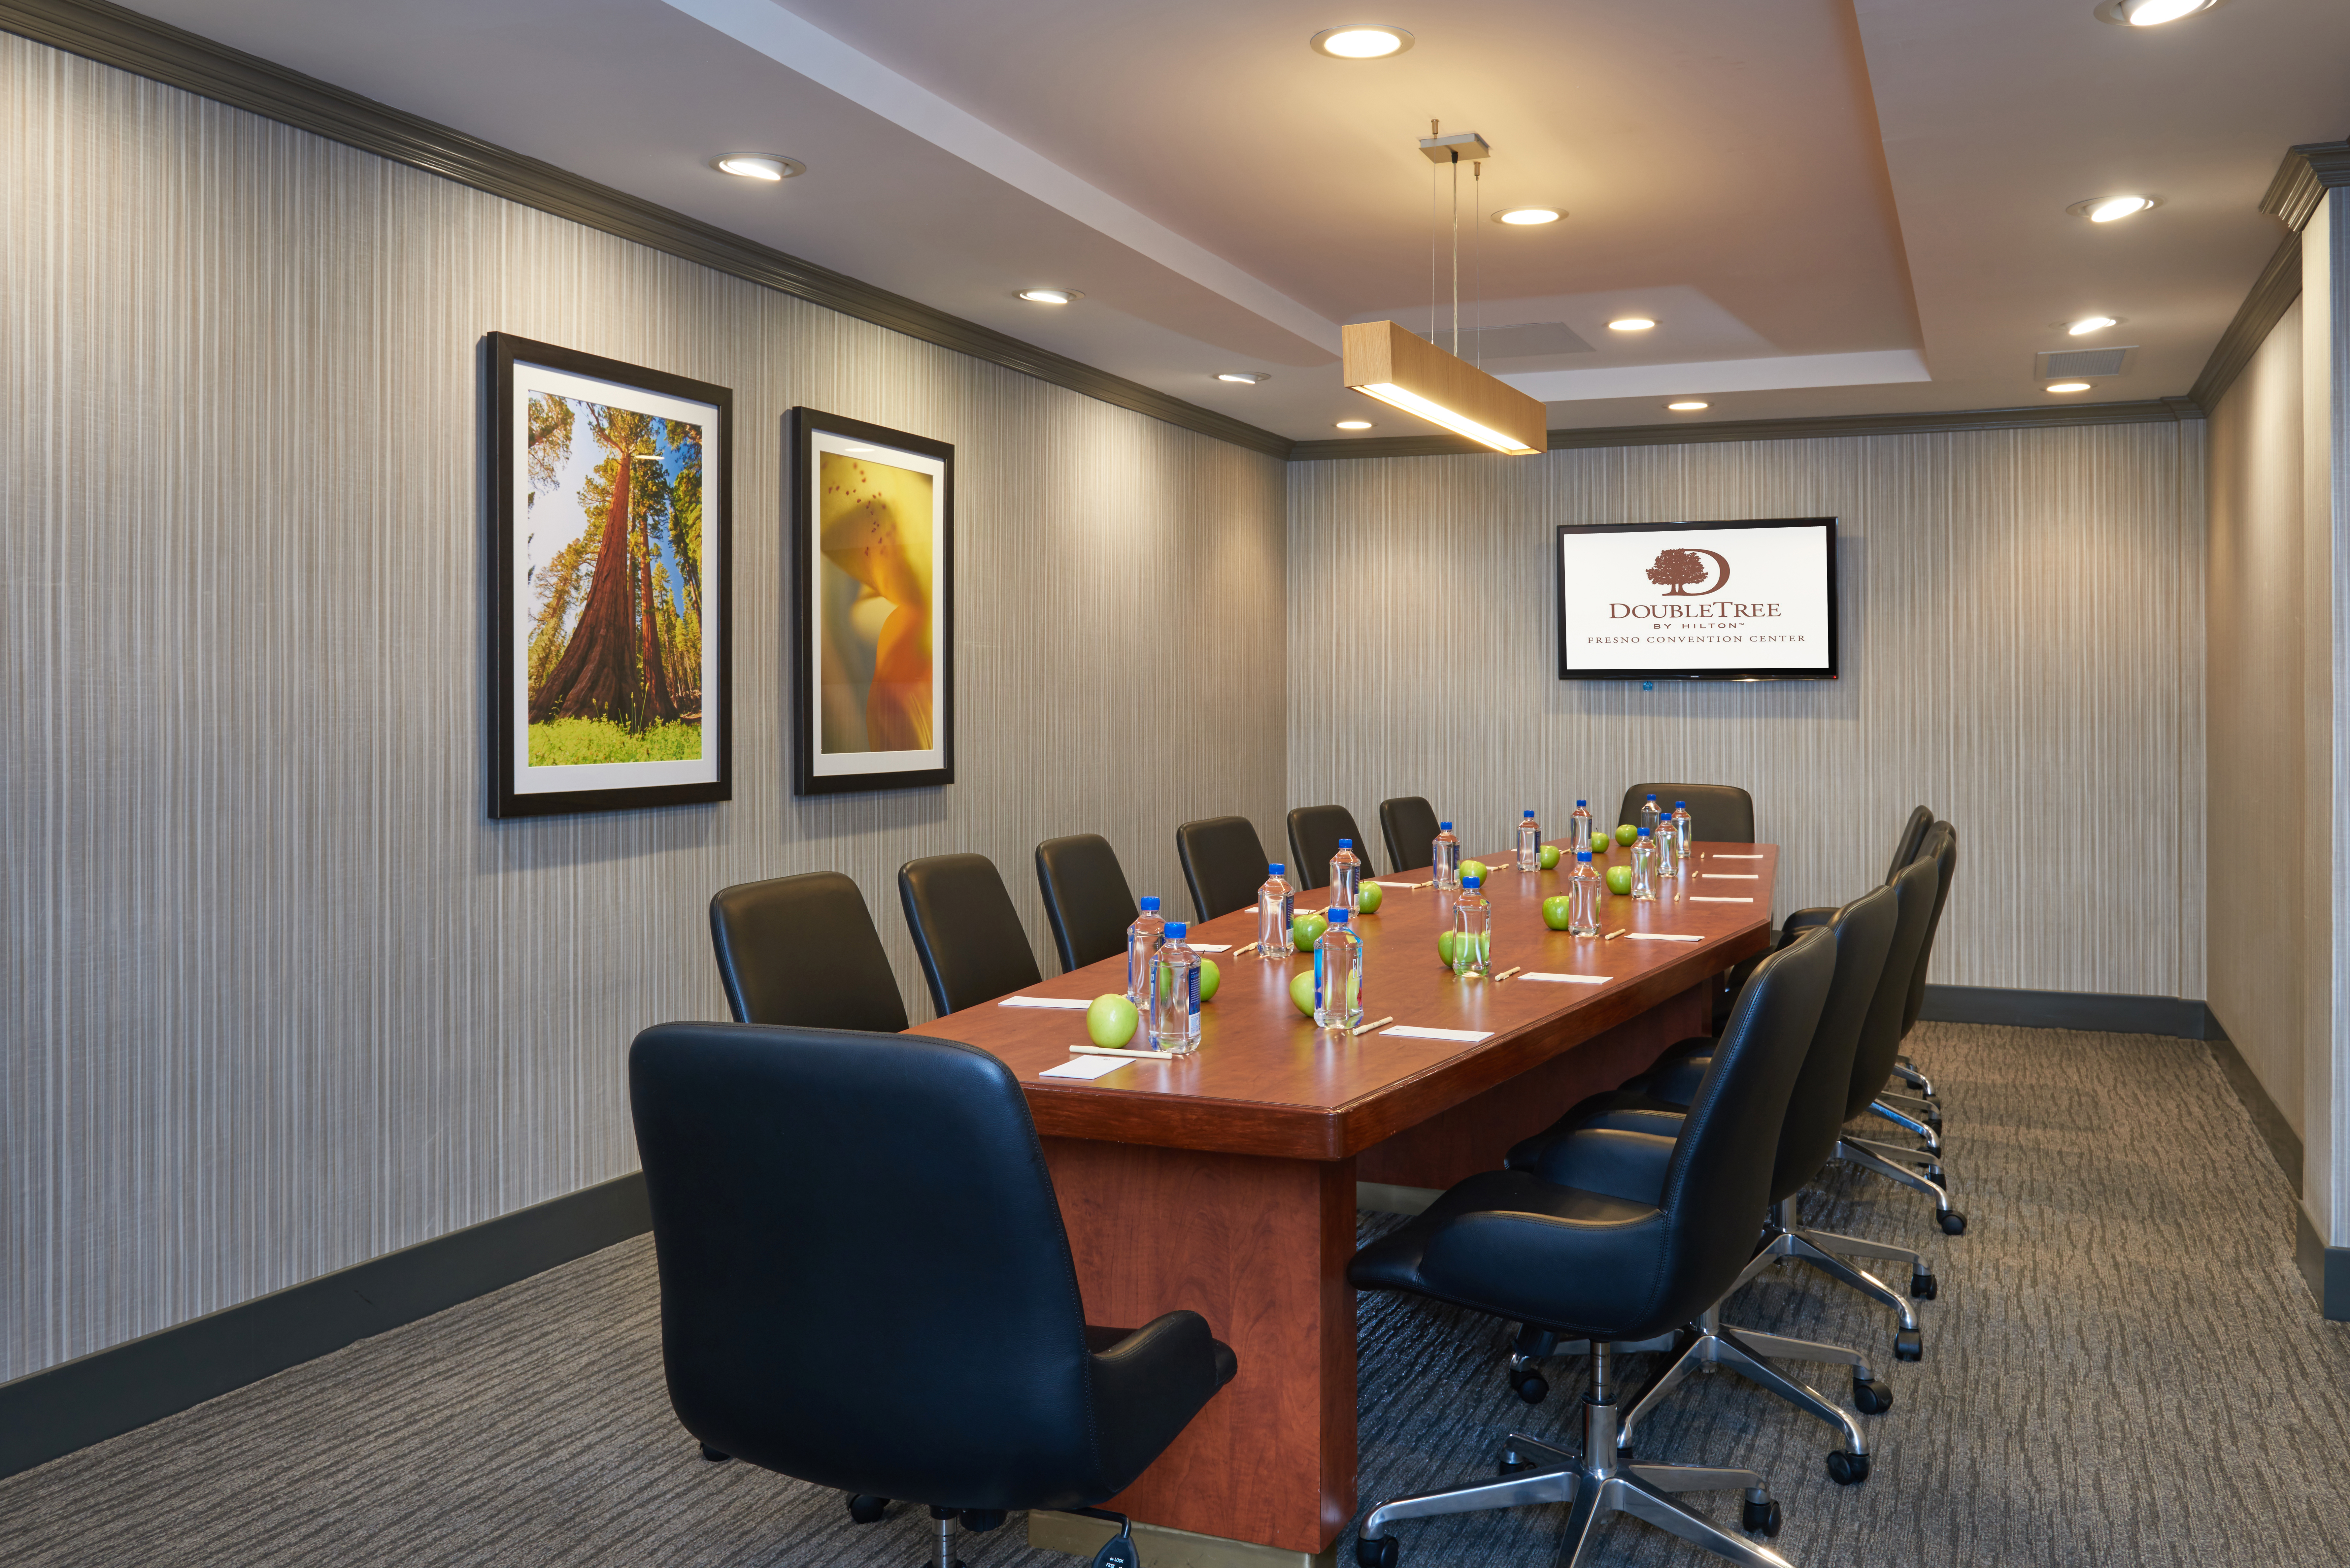 Wall Art, TV, and Seating for 14 at Large Table With Water Bottles and Apples in Boardroom